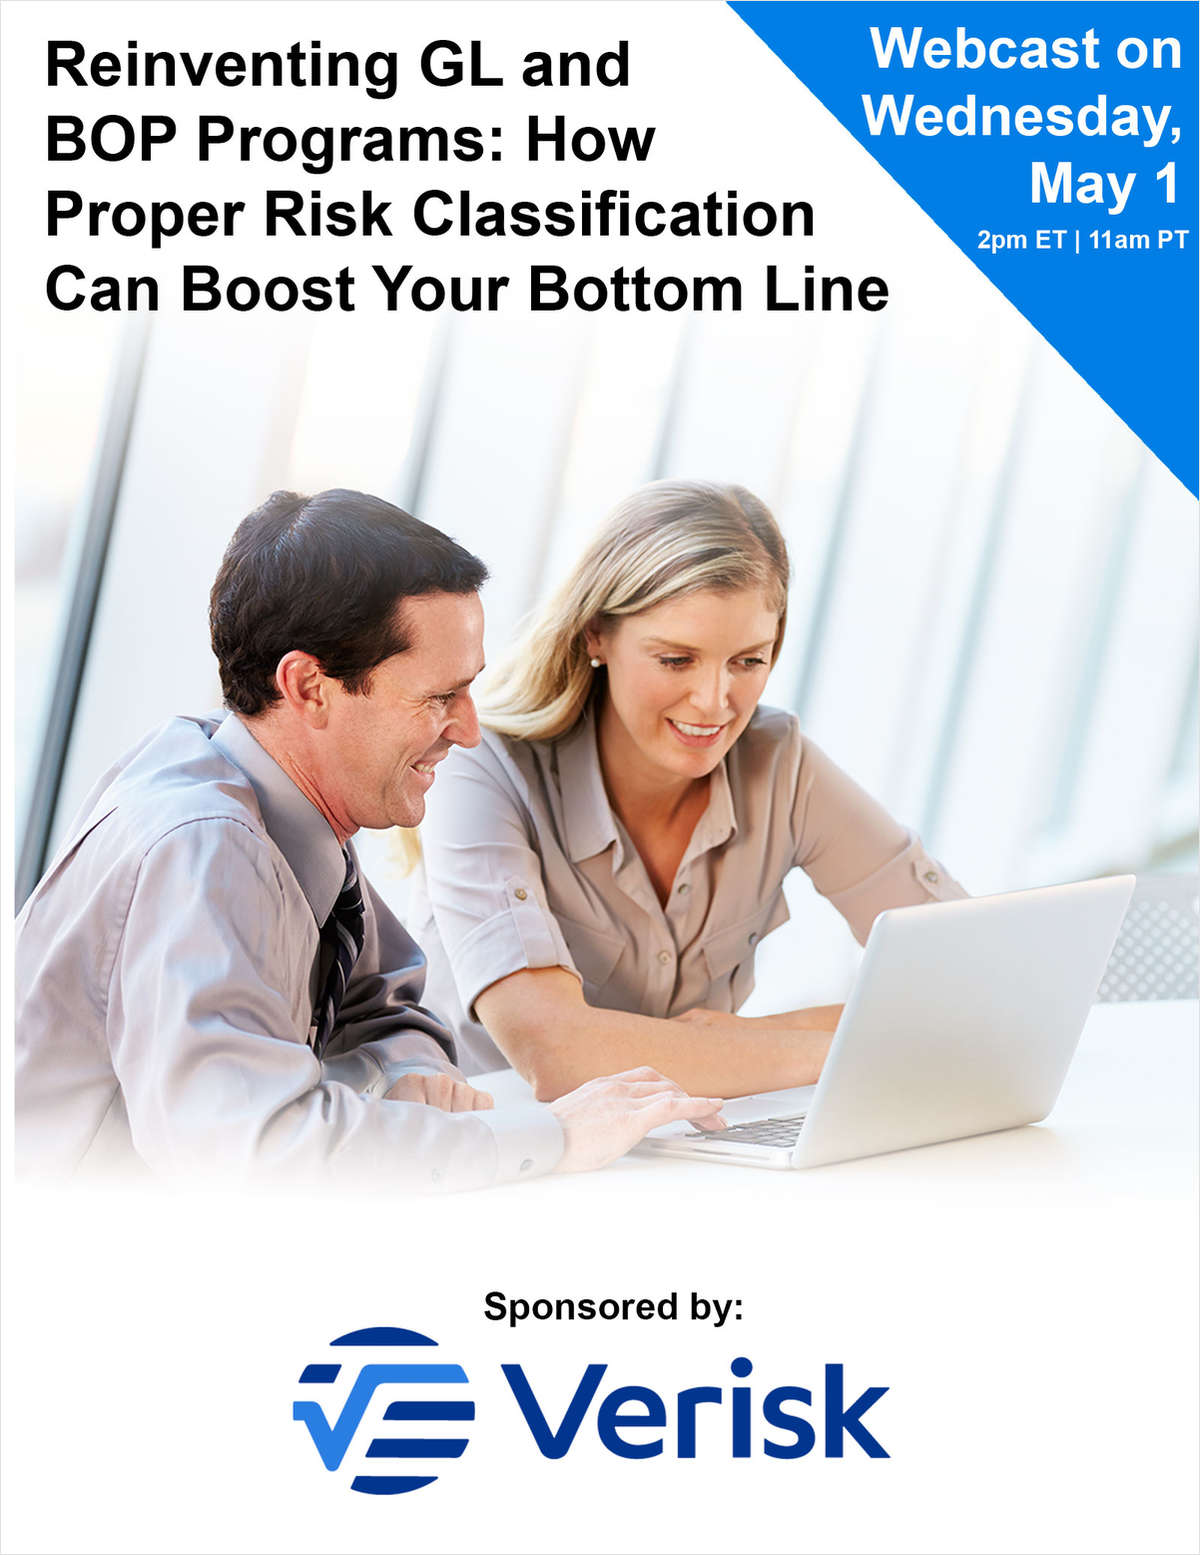 Reinventing GL and BOP Programs: How Proper Risk Classification Can Boost Your Bottom Line